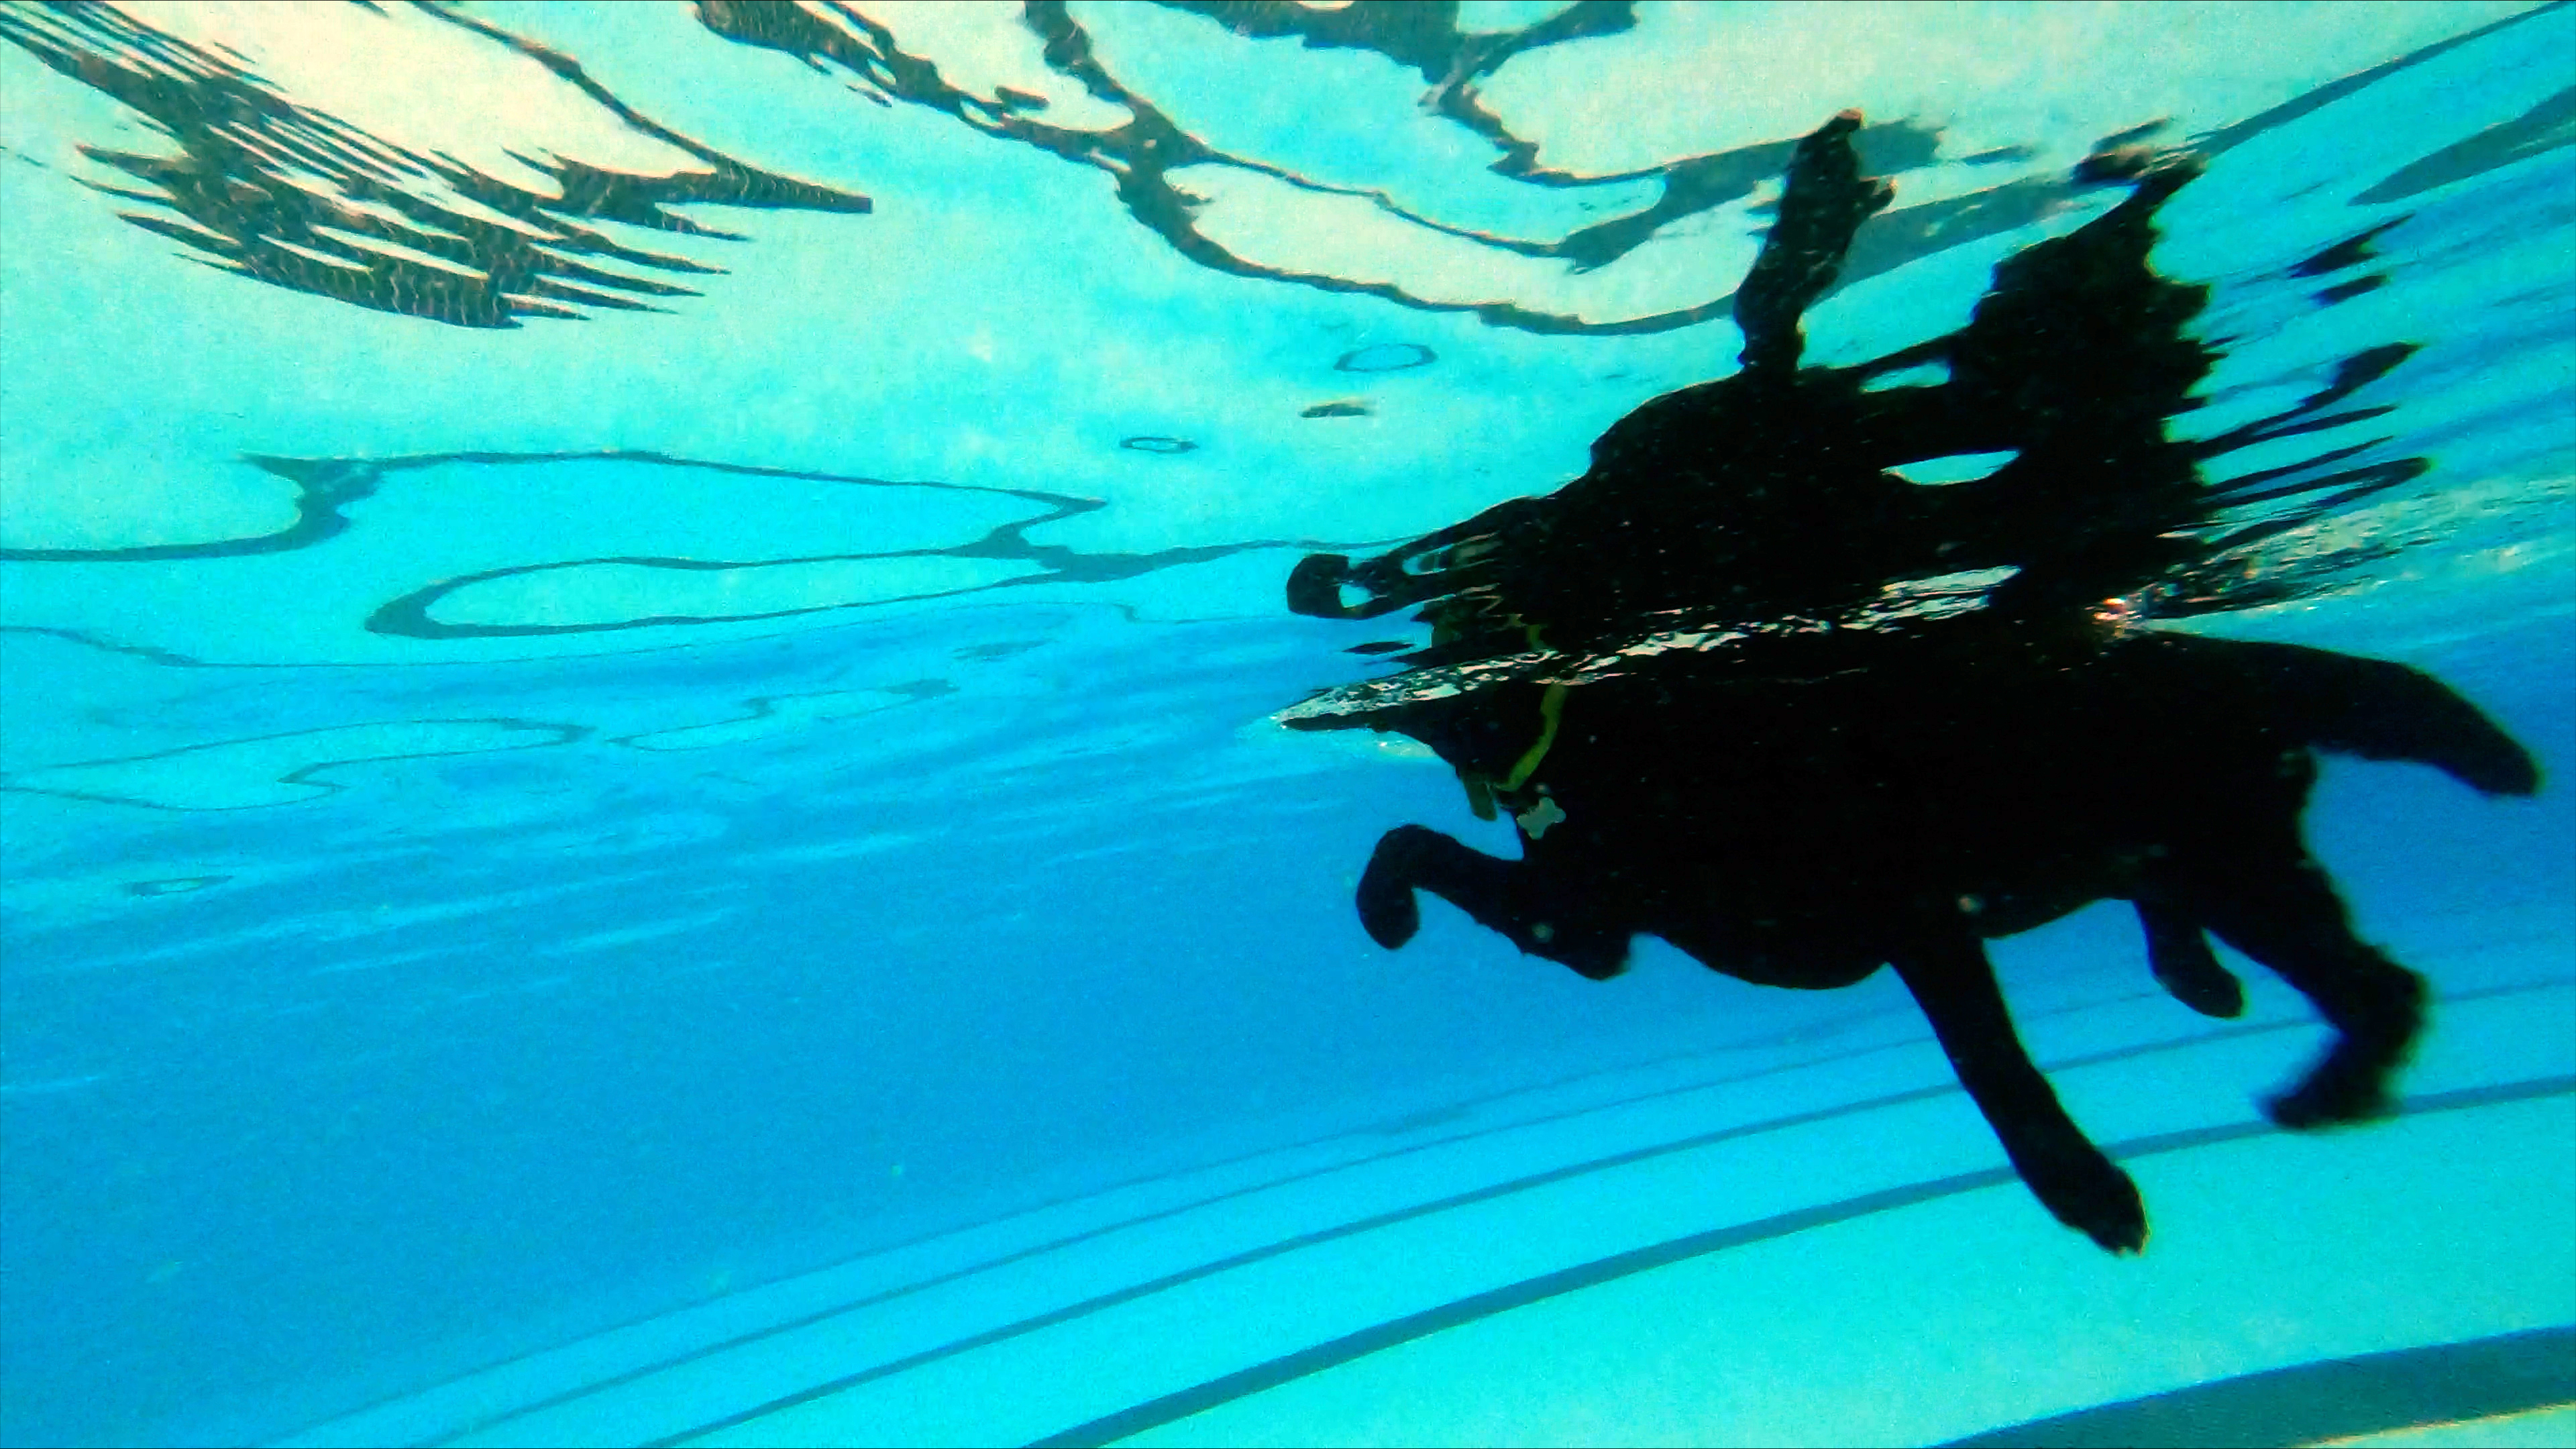 view from underwater of a black dog swimming in a pool